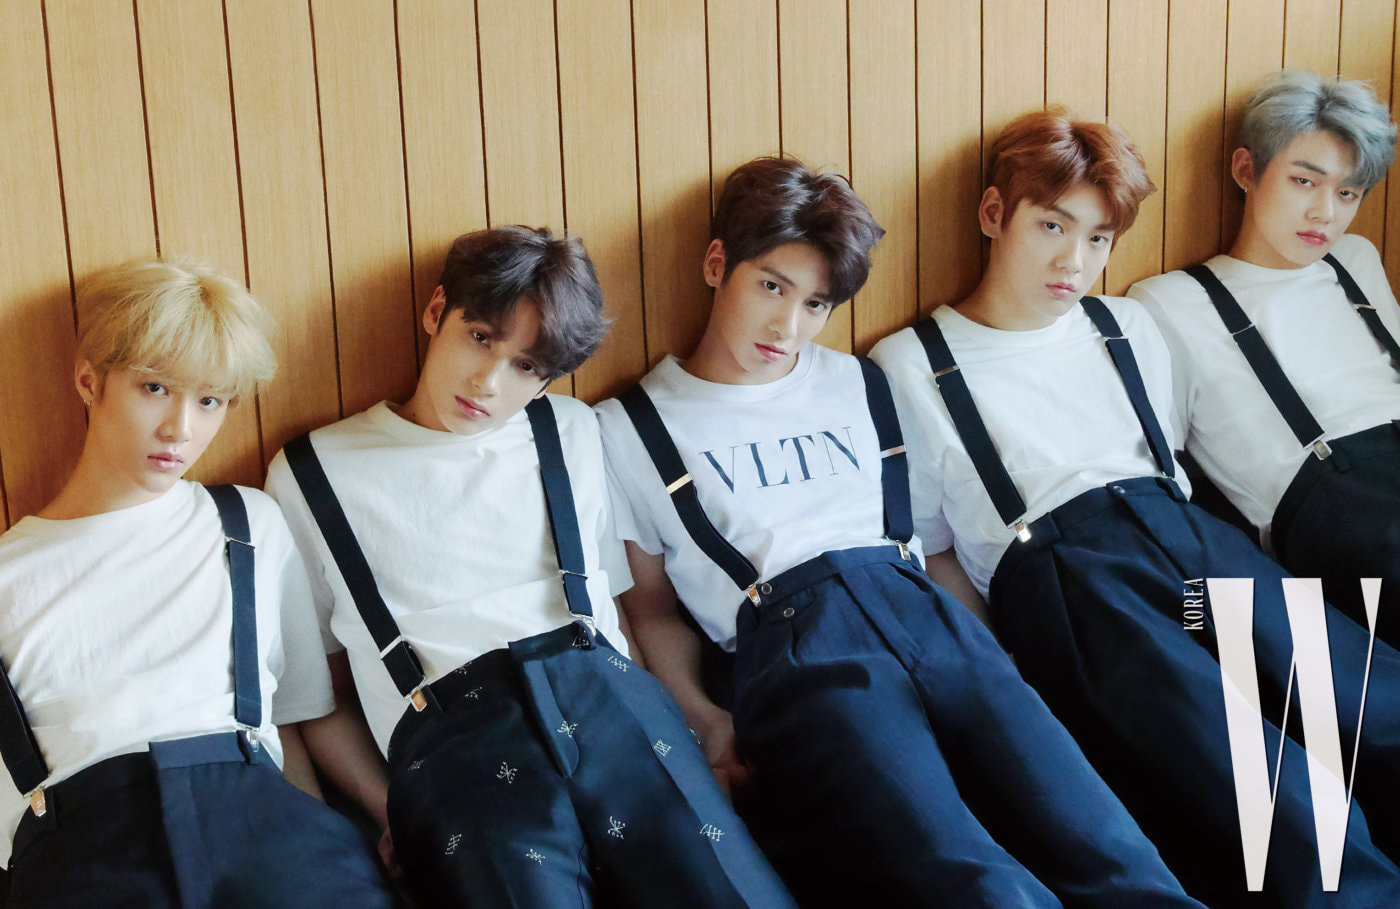 TXT, 'Can't We Just Leave The Monster' choreography video released